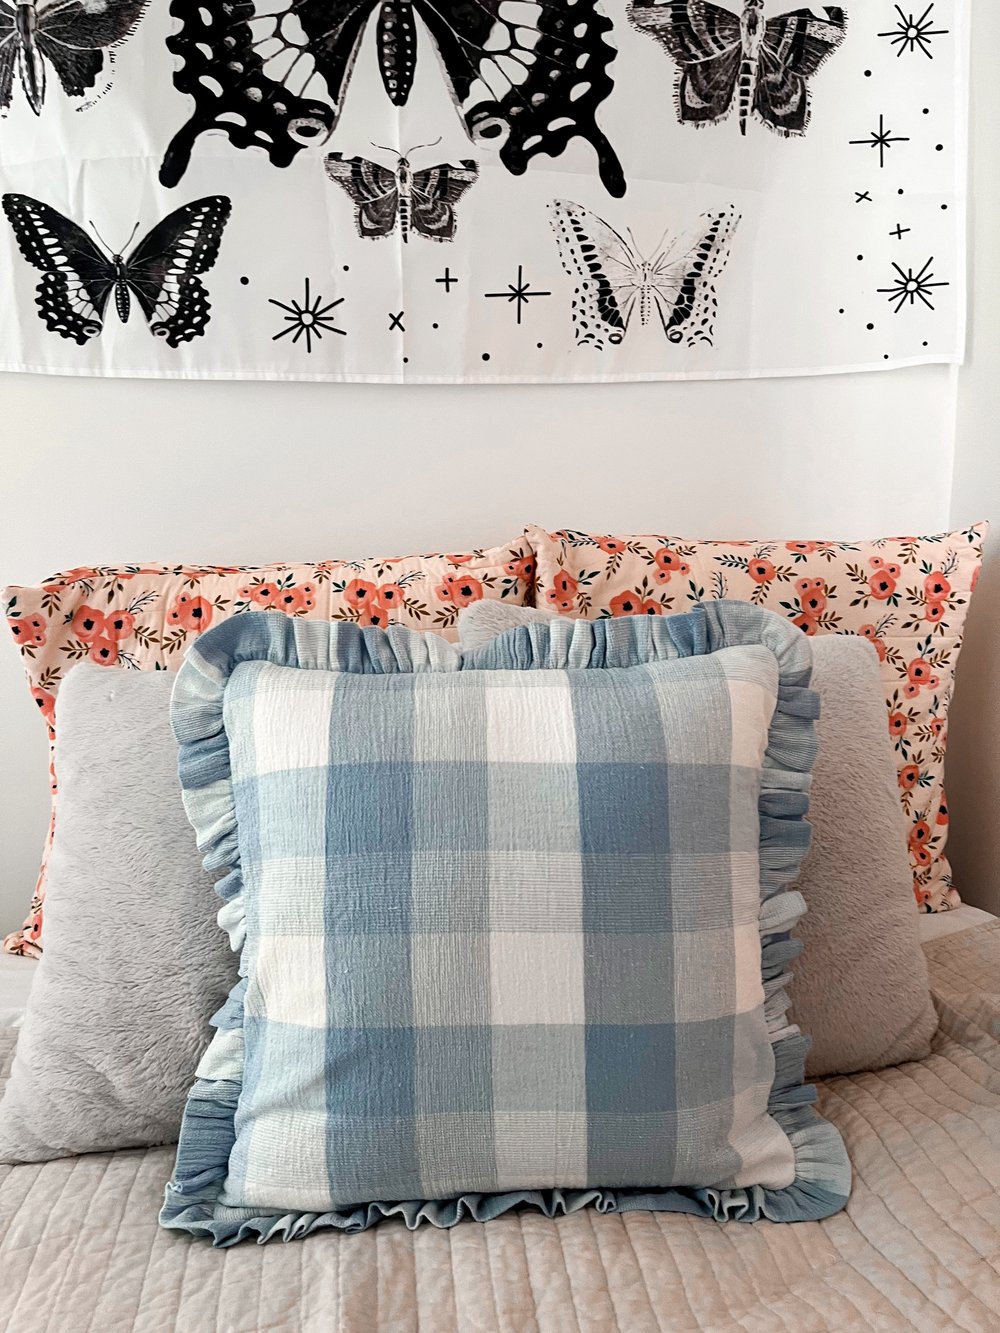 How to Sew a Ruffled Throw Pillow Cover — Pin Cut Sew Studio